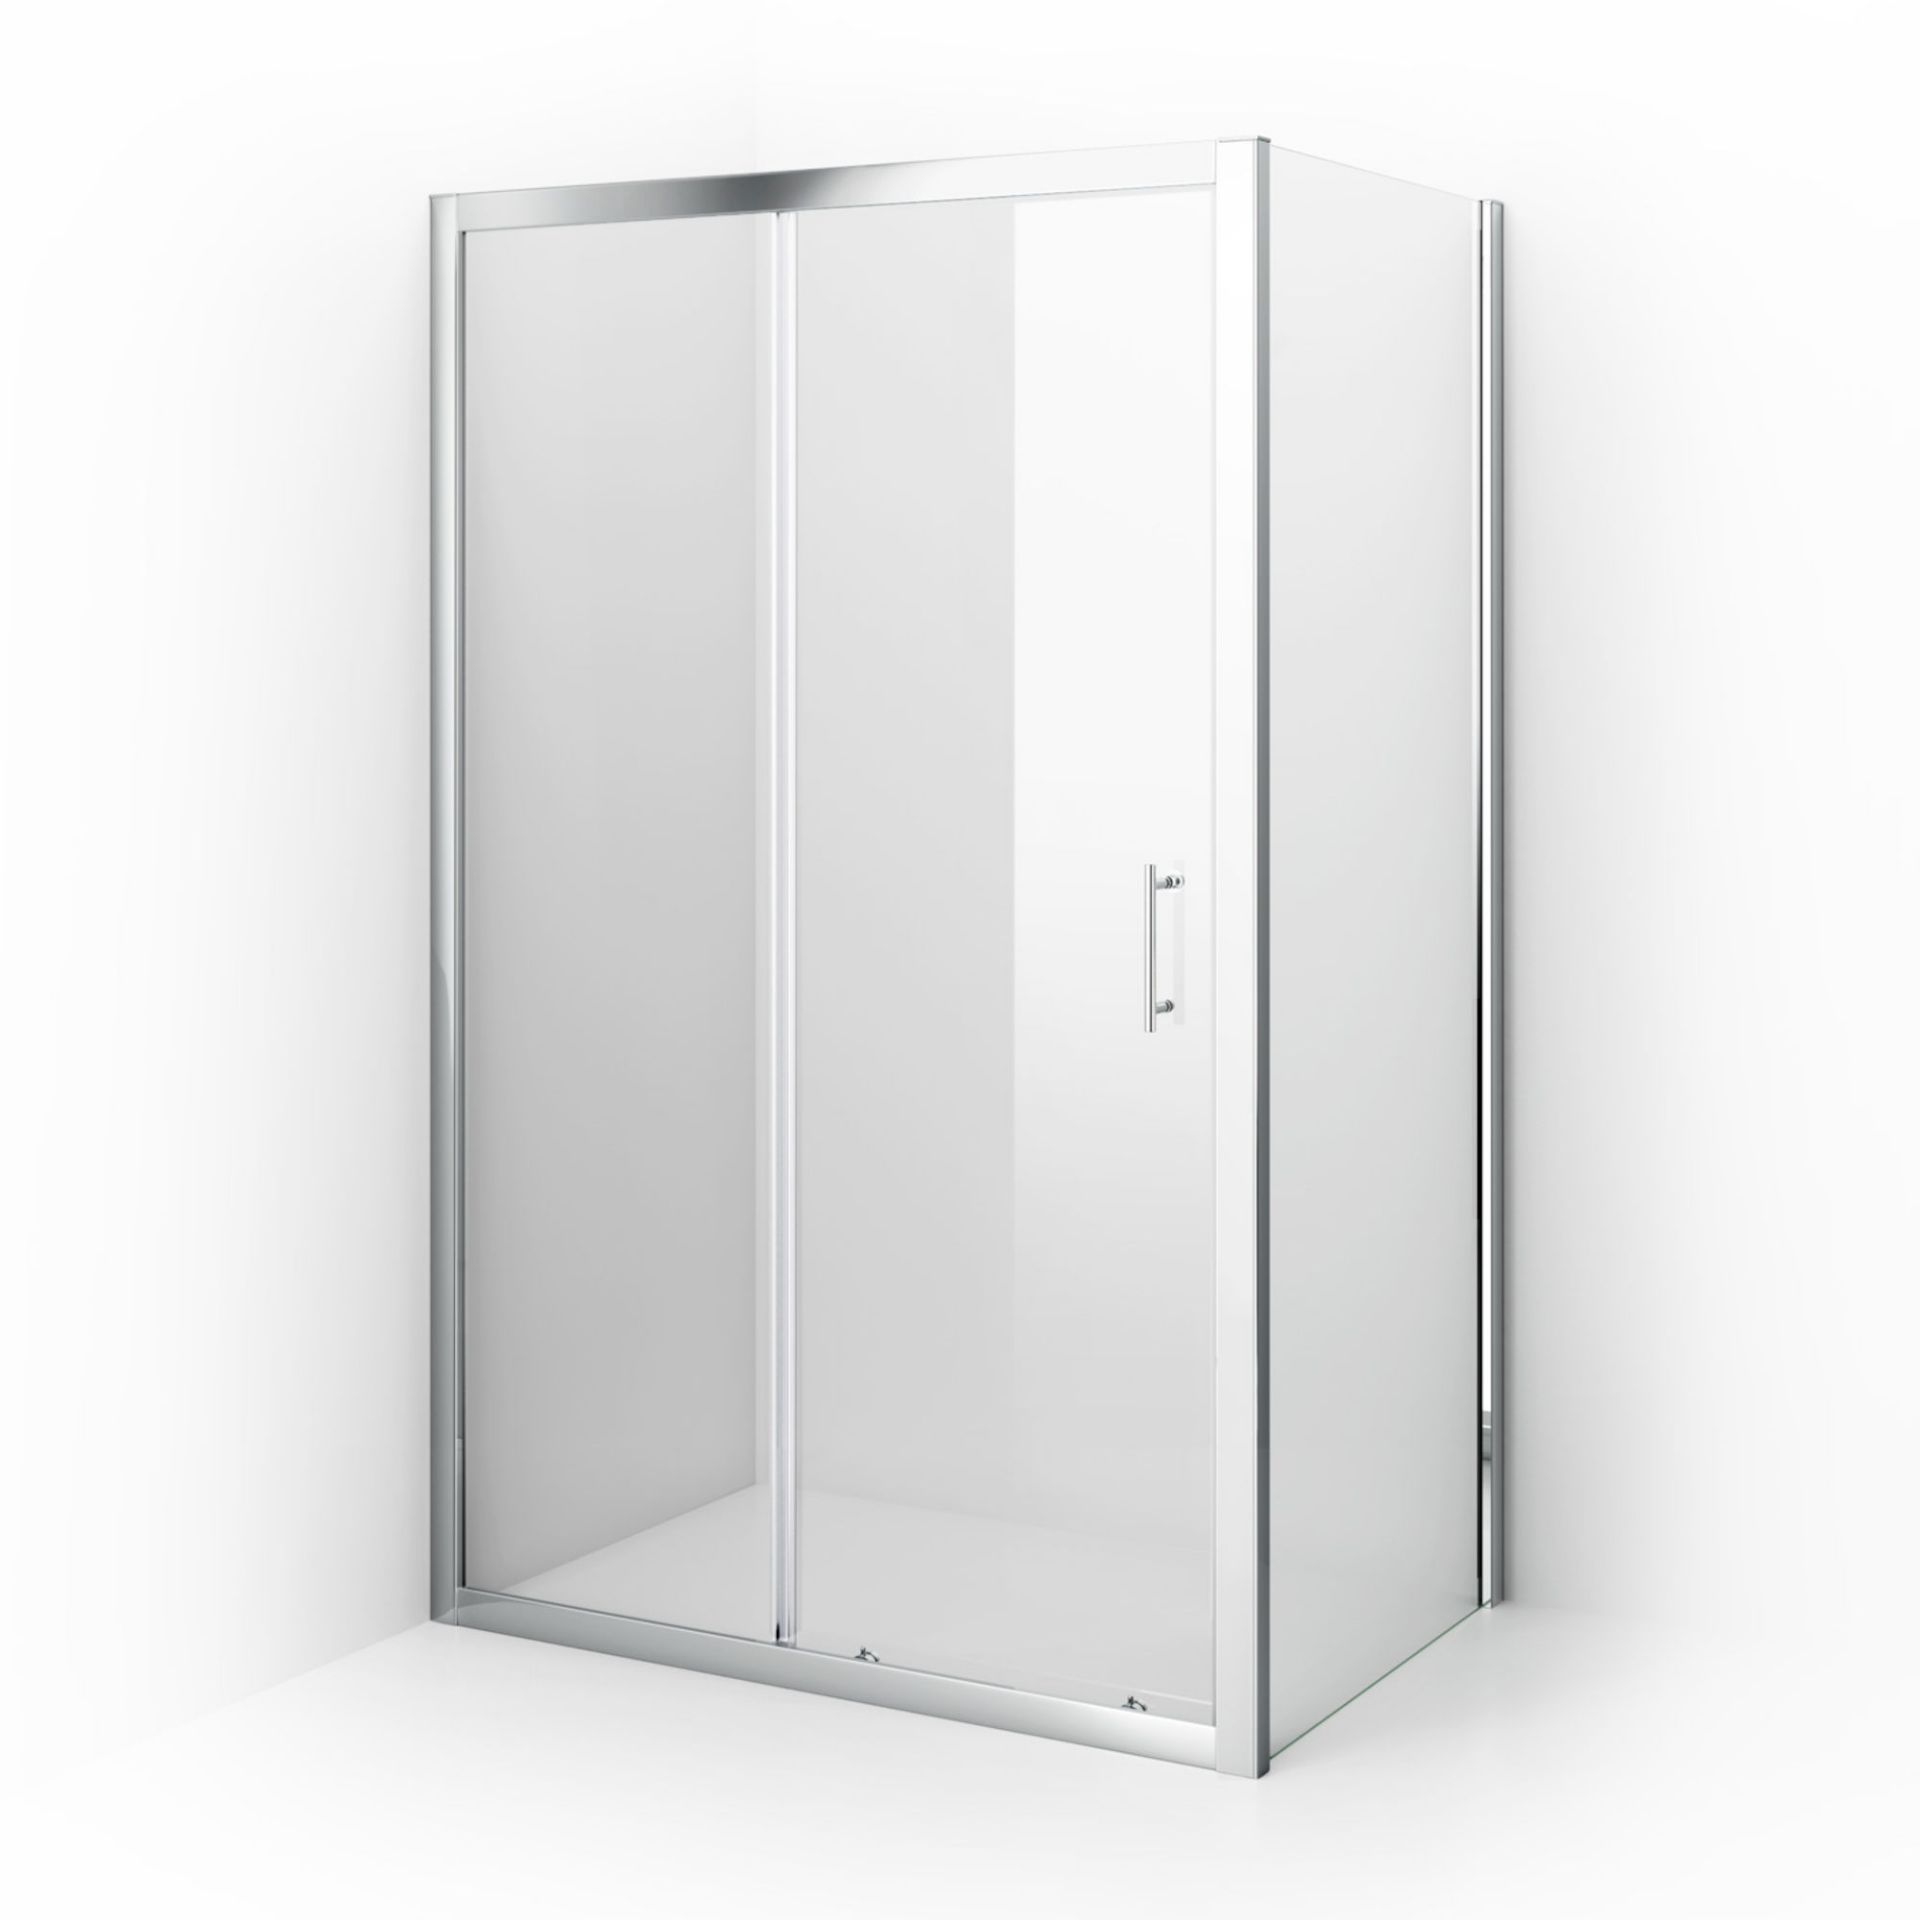 New Twyford 1200x900mm - 6mm - Elements Sliding Door Shower Enclosure. Rrp £549.99. 6mm Safety... - Image 3 of 3